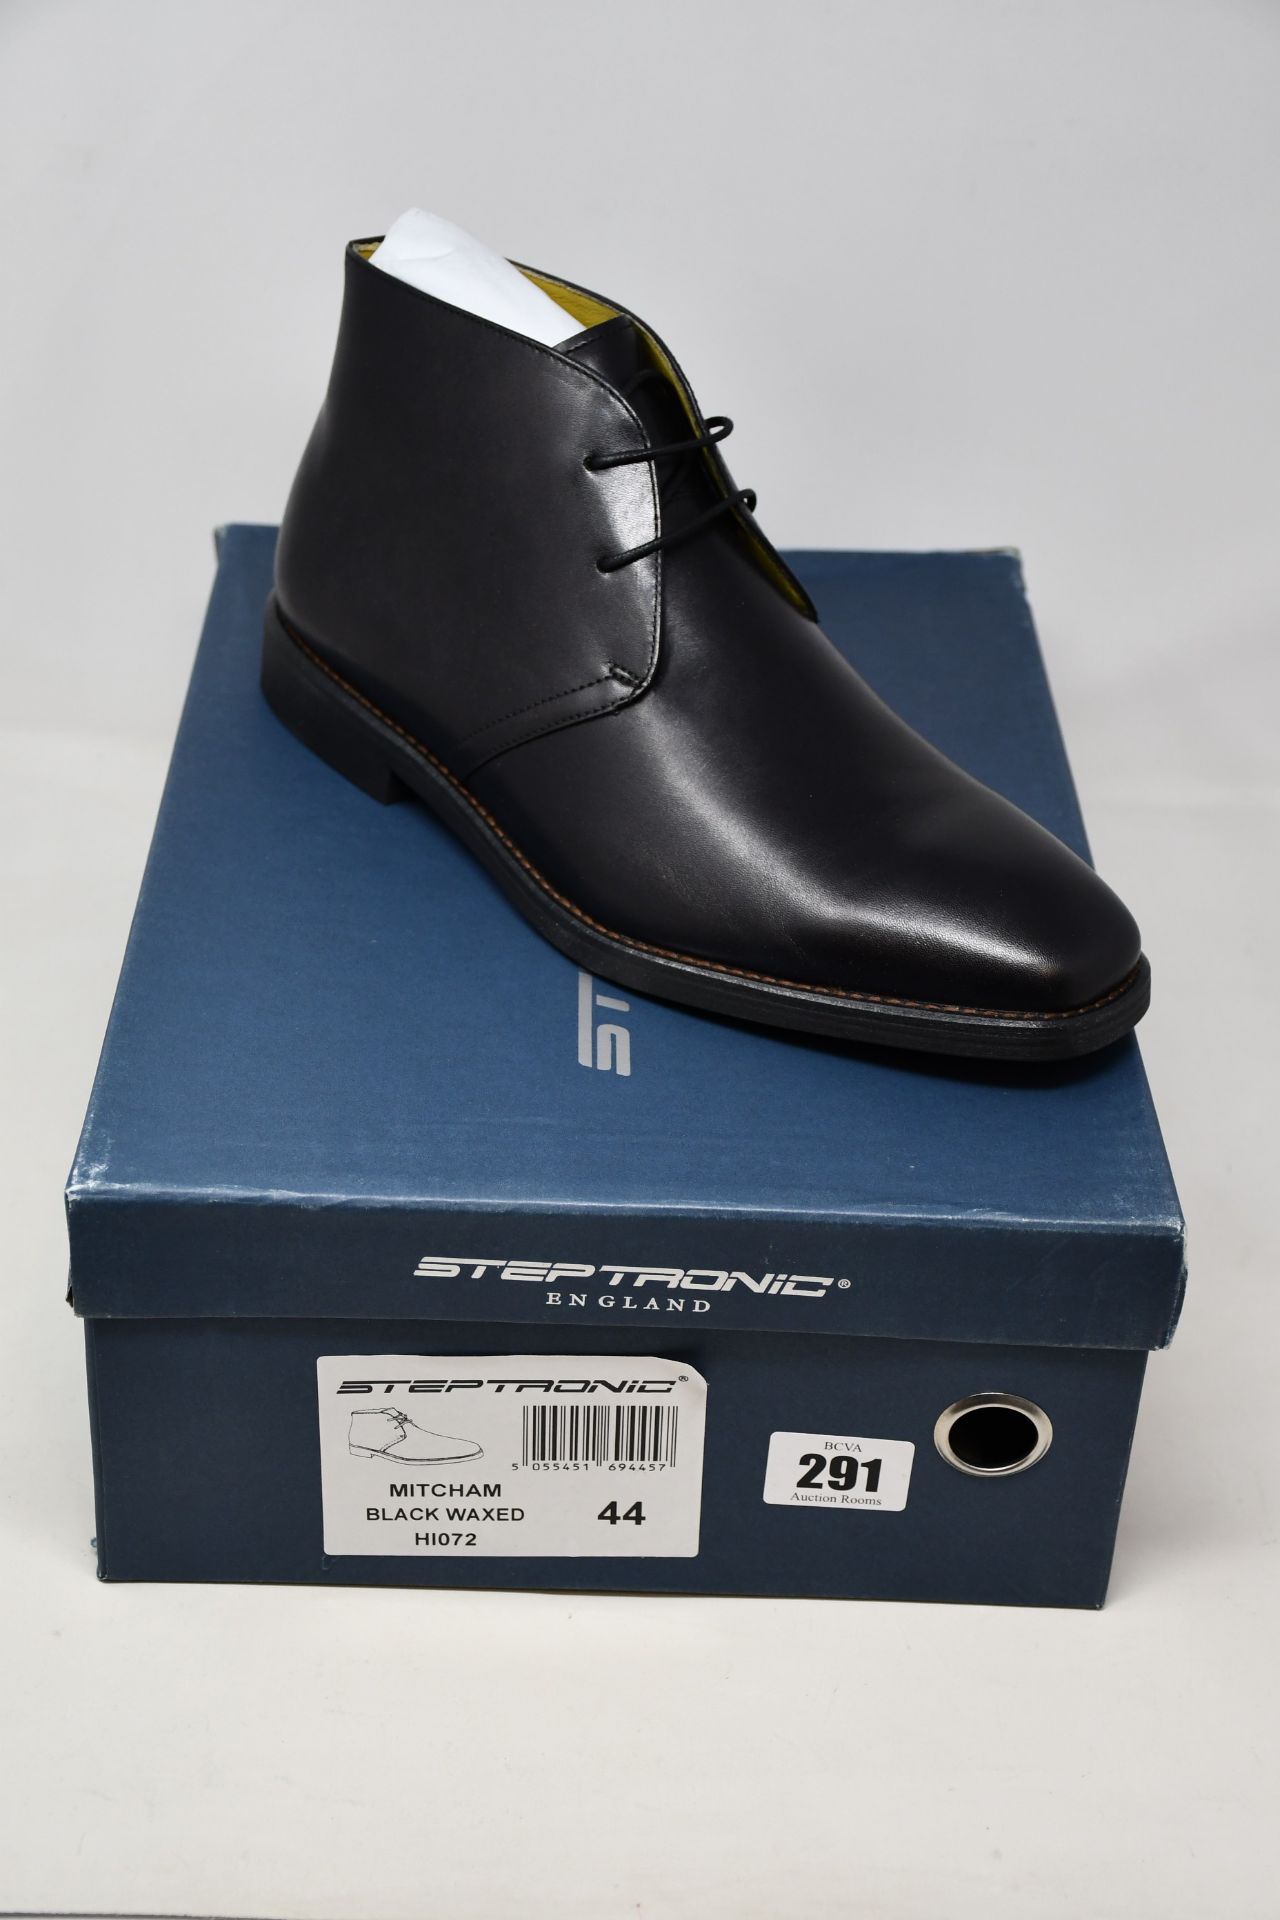 A pair of as new Steptronic Mitcham shoes (EU 44).